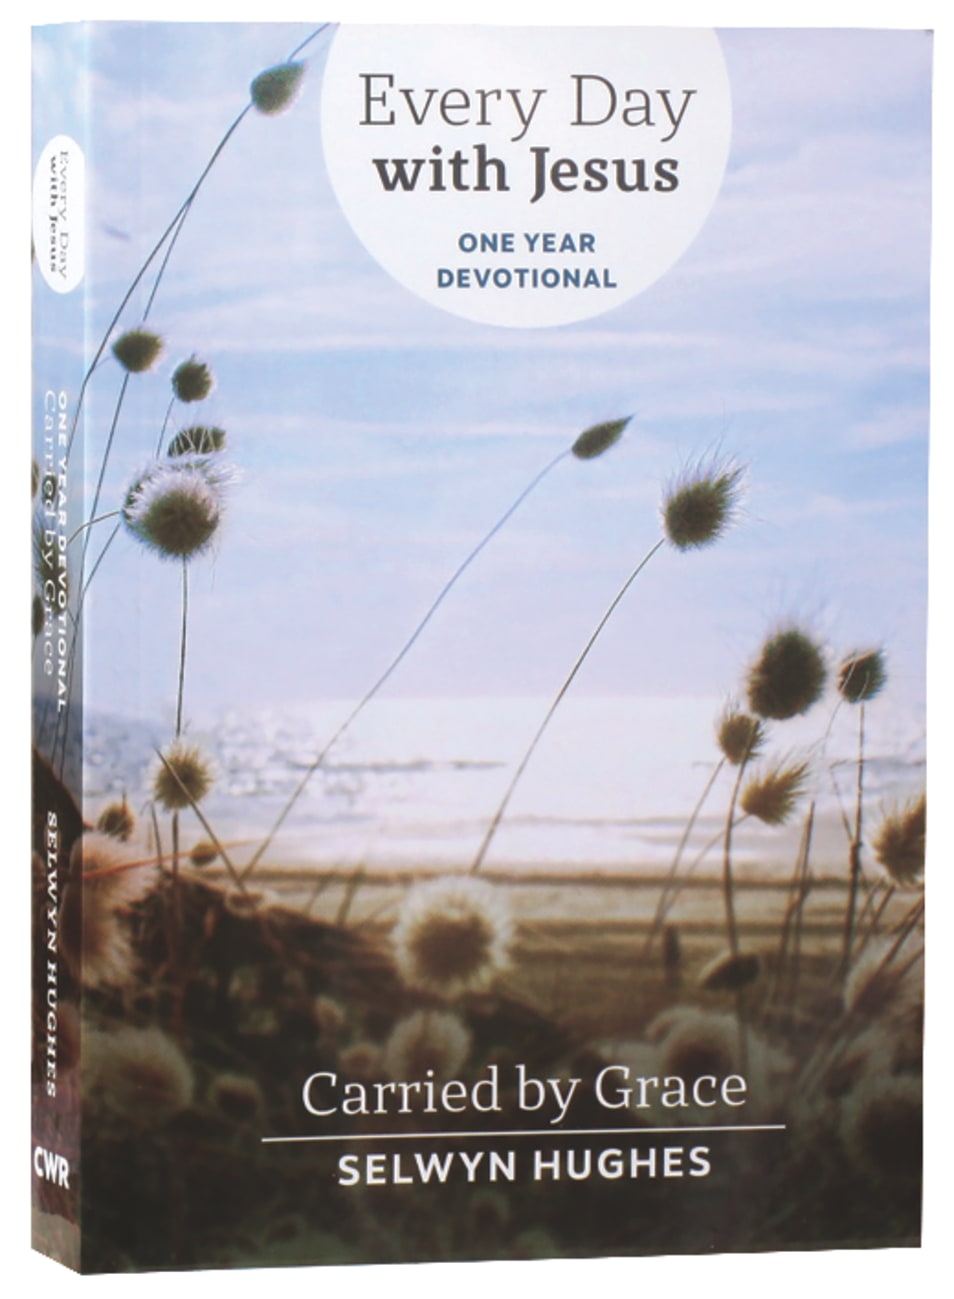 Carried By Grace: One Year Devotional (Every Day With Jesus Devotional Collection Series) Paperback